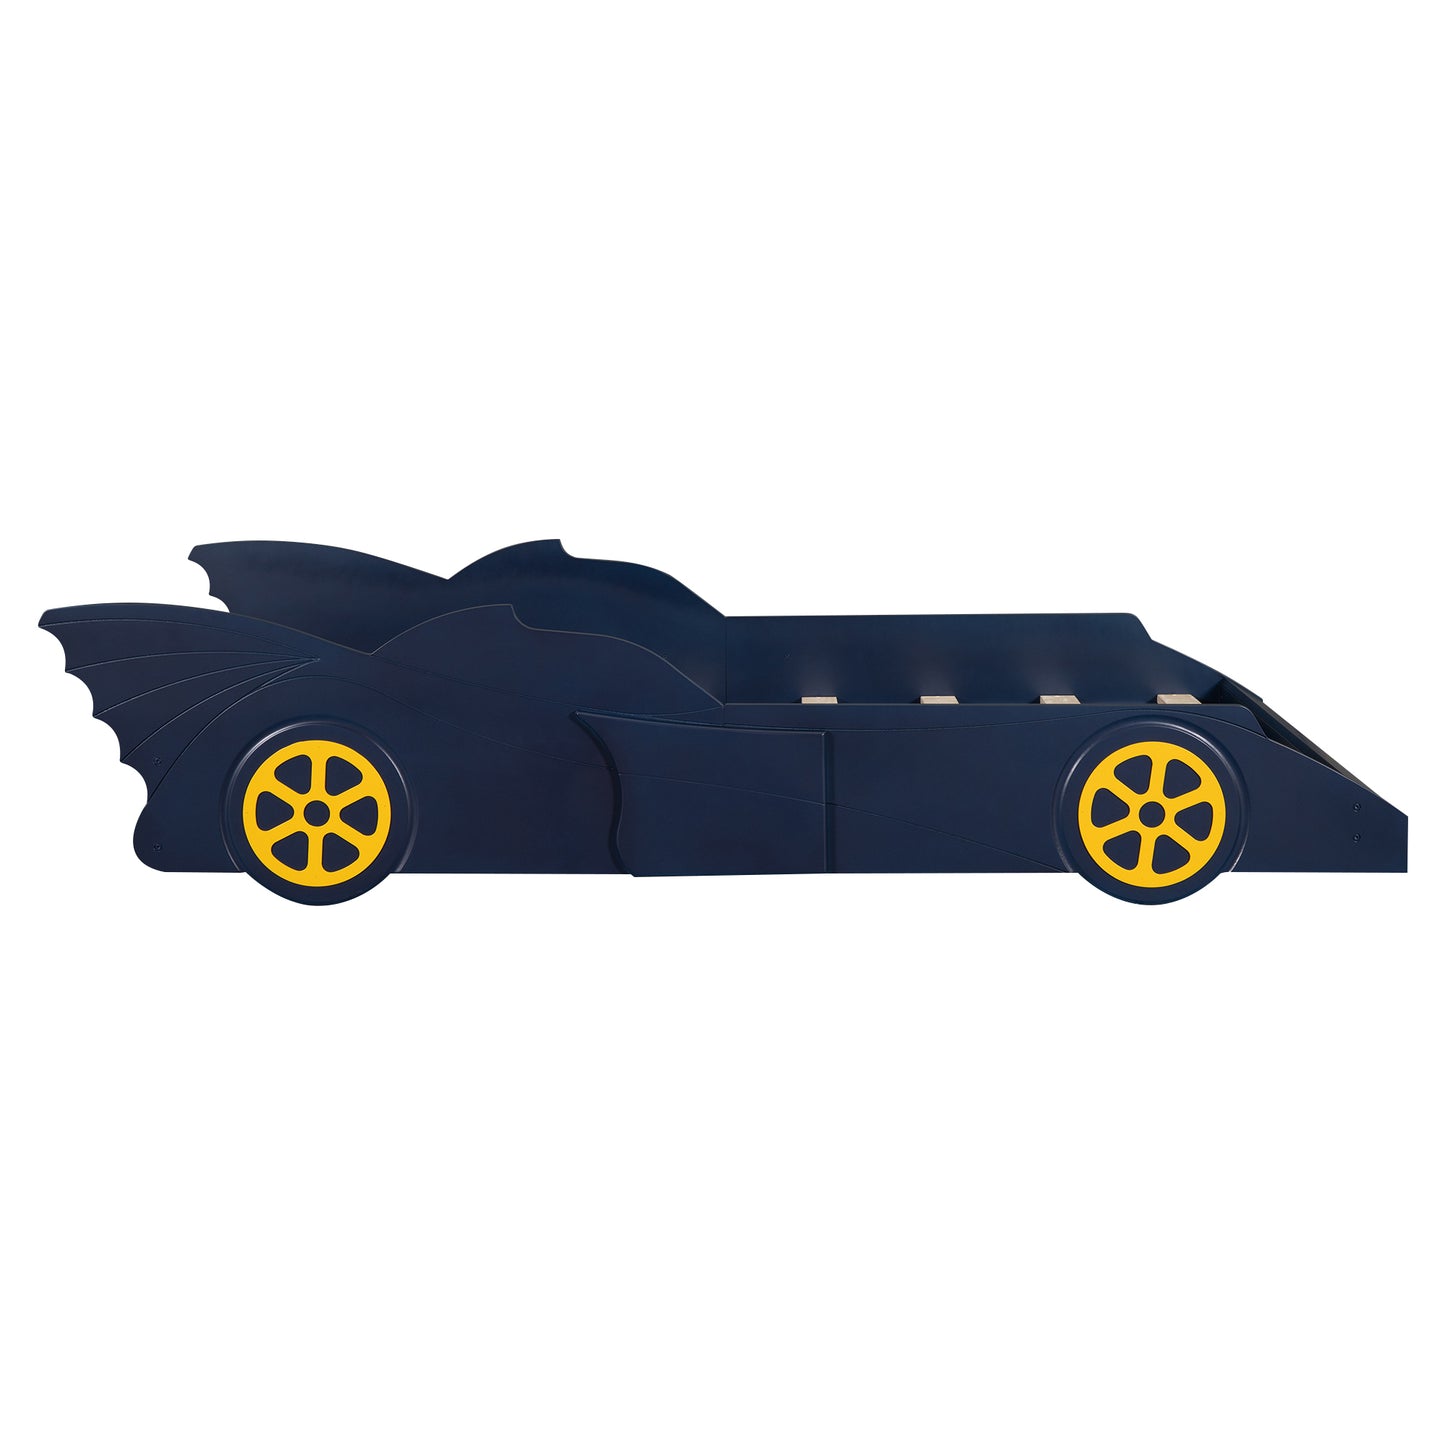 Twin Size Race Car-Shaped Platform Bed with Wheels,Blue+Yellow